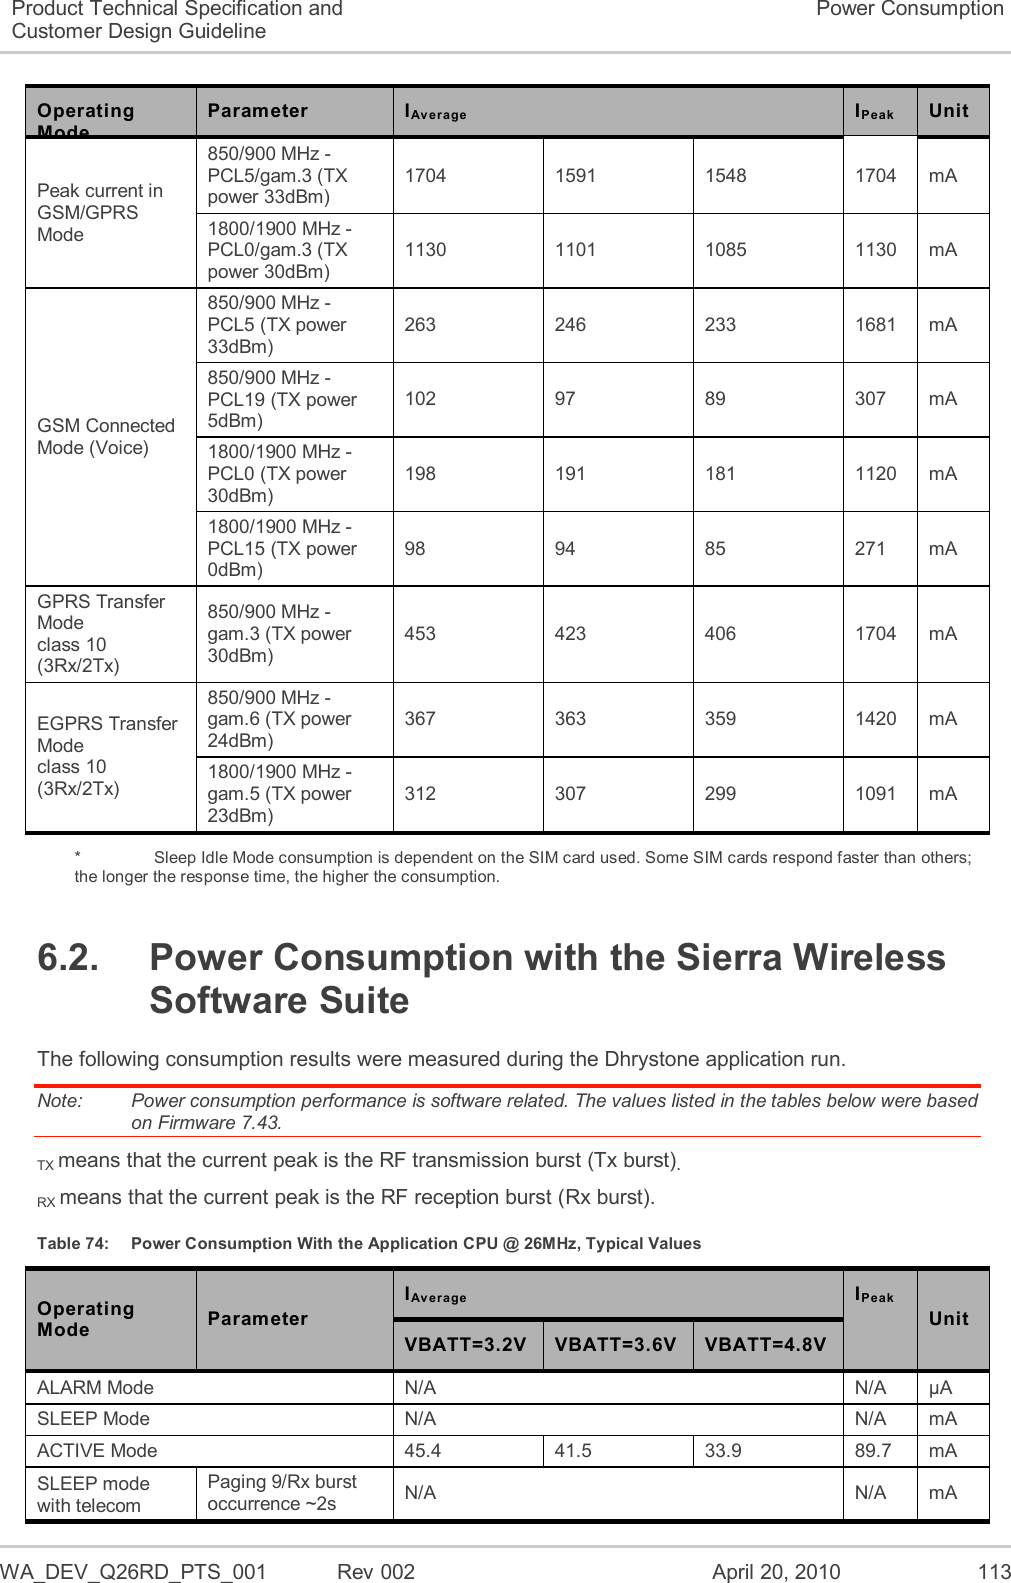   WA_DEV_Q26RD_PTS_001  Rev 002  April 20, 2010 113 Product Technical Specification and Customer Design Guideline Power Consumption Operating Mode Parameter IAverage IPeak Unit Peak current in GSM/GPRS Mode 850/900 MHz - PCL5/gam.3 (TX power 33dBm) 1704 1591 1548 1704 mA 1800/1900 MHz - PCL0/gam.3 (TX power 30dBm) 1130 1101 1085 1130 mA GSM Connected Mode (Voice) 850/900 MHz - PCL5 (TX power 33dBm) 263 246 233 1681 mA 850/900 MHz - PCL19 (TX power 5dBm) 102 97 89 307 mA 1800/1900 MHz - PCL0 (TX power 30dBm) 198 191 181 1120 mA 1800/1900 MHz - PCL15 (TX power 0dBm) 98 94 85 271 mA GPRS Transfer Mode  class 10 (3Rx/2Tx) 850/900 MHz - gam.3 (TX power 30dBm) 453 423 406 1704 mA EGPRS Transfer Mode  class 10 (3Rx/2Tx) 850/900 MHz - gam.6 (TX power 24dBm) 367 363 359 1420 mA 1800/1900 MHz - gam.5 (TX power 23dBm) 312 307 299 1091 mA *    Sleep Idle Mode consumption is dependent on the SIM card used. Some SIM cards respond faster than others; the longer the response time, the higher the consumption. 6.2.  Power Consumption with the Sierra Wireless Software Suite The following consumption results were measured during the Dhrystone application run. Note:   Power consumption performance is software related. The values listed in the tables below were based on Firmware 7.43. TX means that the current peak is the RF transmission burst (Tx burst). RX means that the current peak is the RF reception burst (Rx burst). Table 74:  Power Consumption With the Application CPU @ 26MHz, Typical Values Operating Mode Parameter IAv e r age  IPeak Unit VBATT=3.2V VBATT=3.6V VBATT=4.8V ALARM Mode N/A N/A µA SLEEP Mode N/A N/A mA ACTIVE Mode 45.4 41.5 33.9 89.7 mA SLEEP mode with telecom Paging 9/Rx burst occurrence ~2s N/A N/A mA 